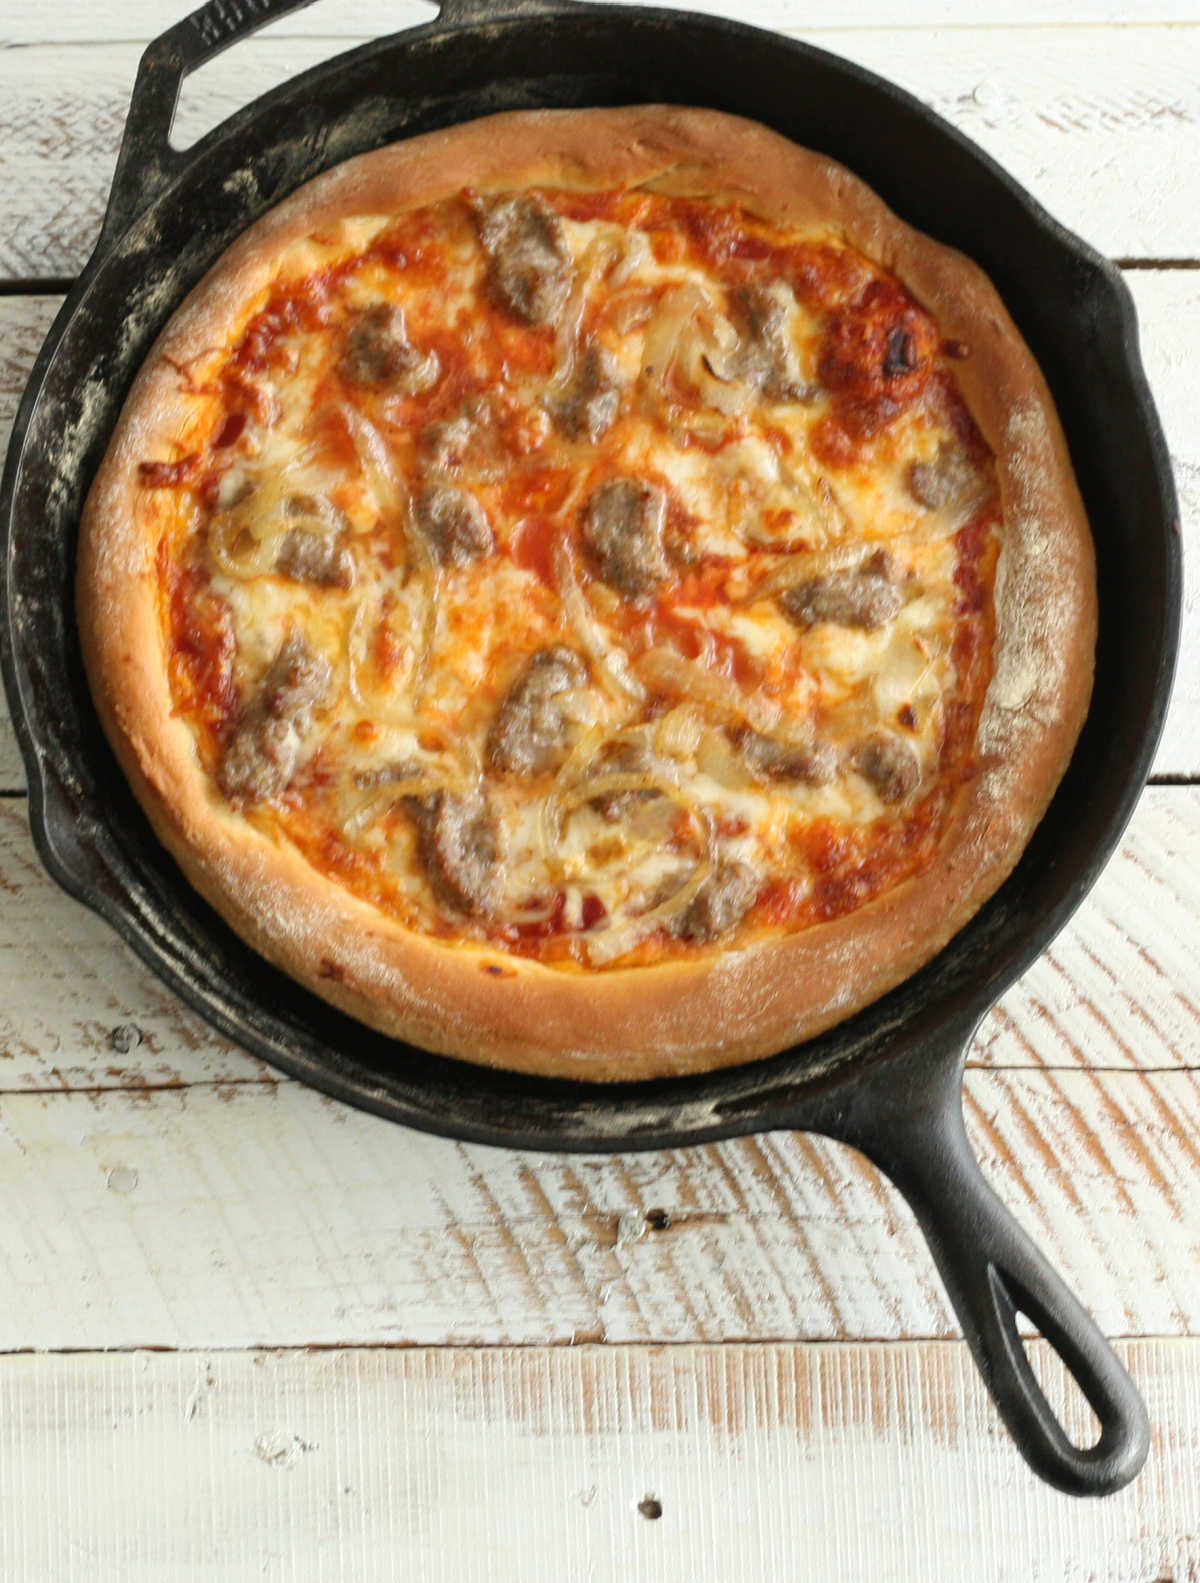 Pizza baked in a cast iron skillet with golden brown cheese and sausage pieces.